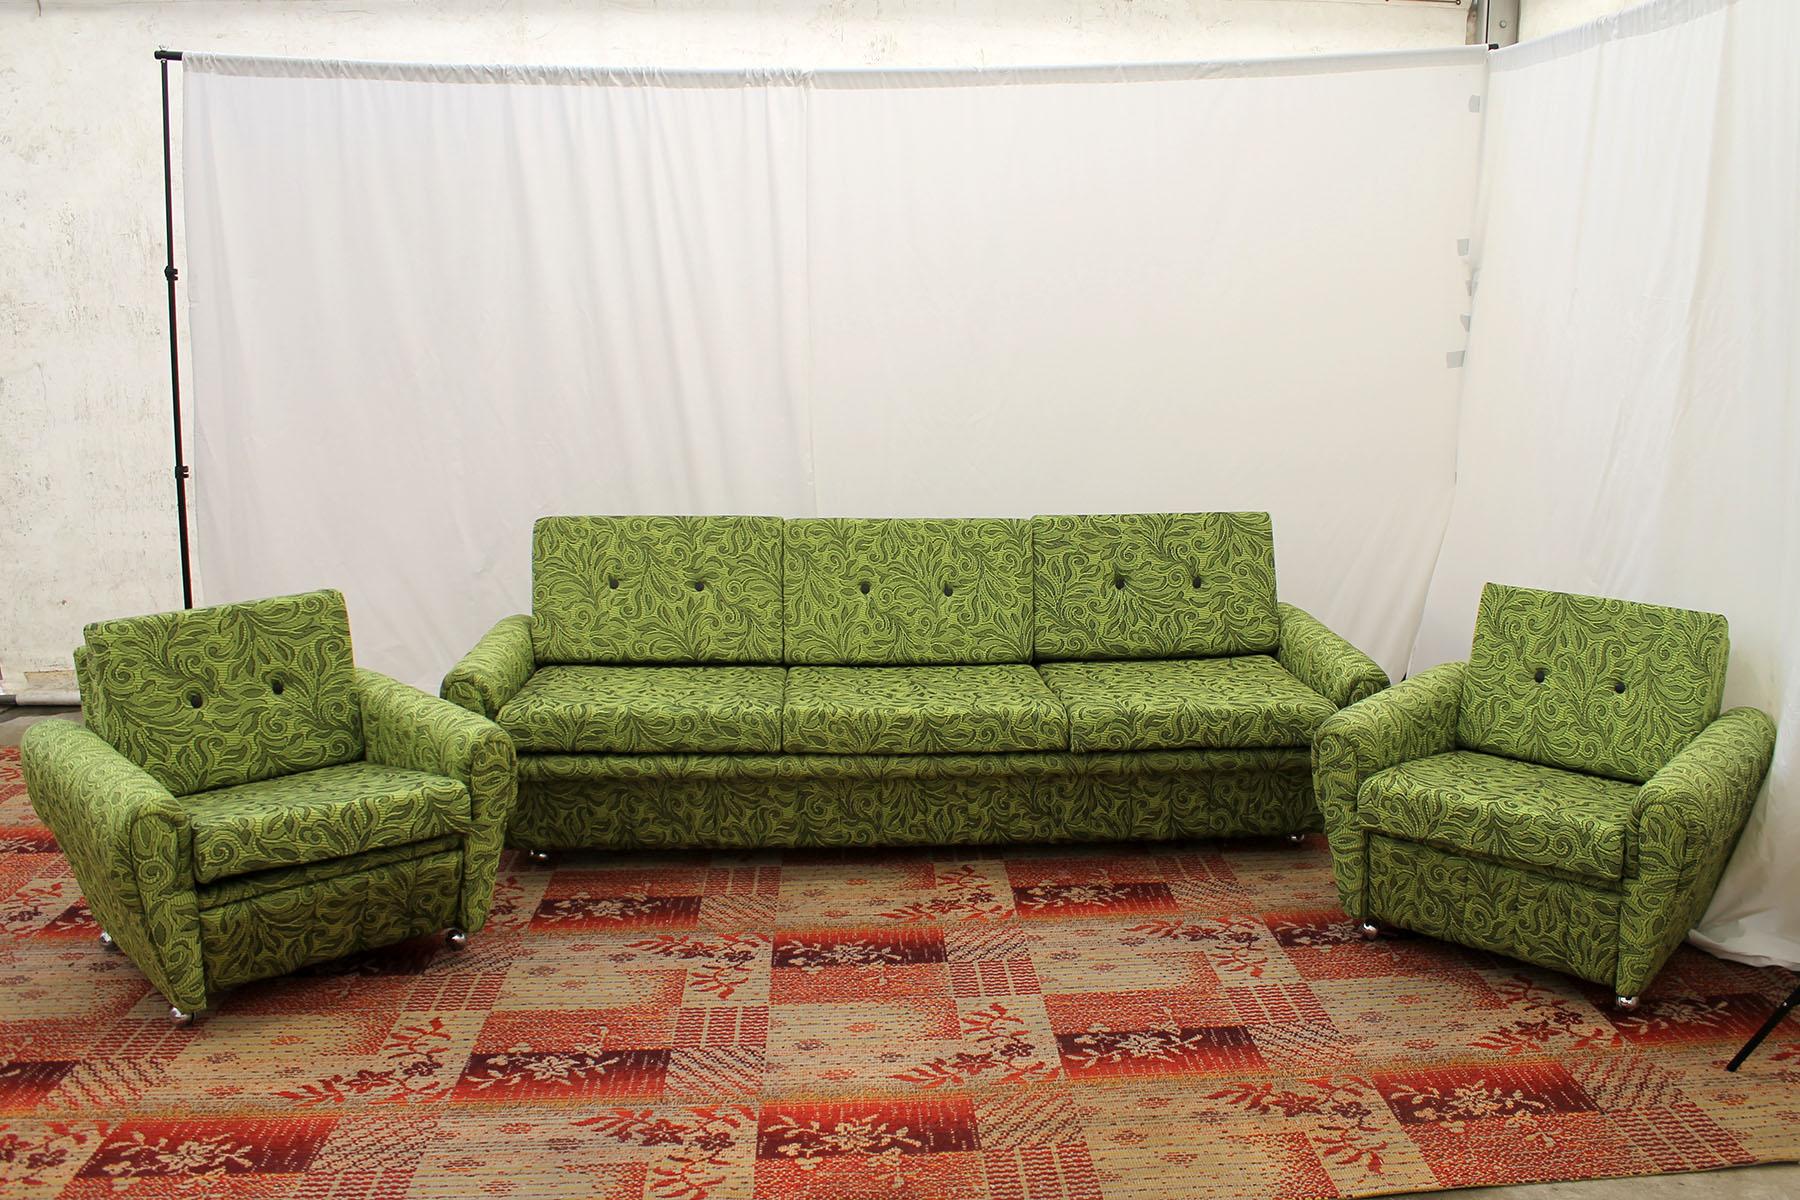 This living room set is a typical example of furniture design of the 1980s in the former Czechoslovakia. The furniture is very comfortable.
It consists of one sofa and two armchairs on wheels. The set has original green upholstery, missing three